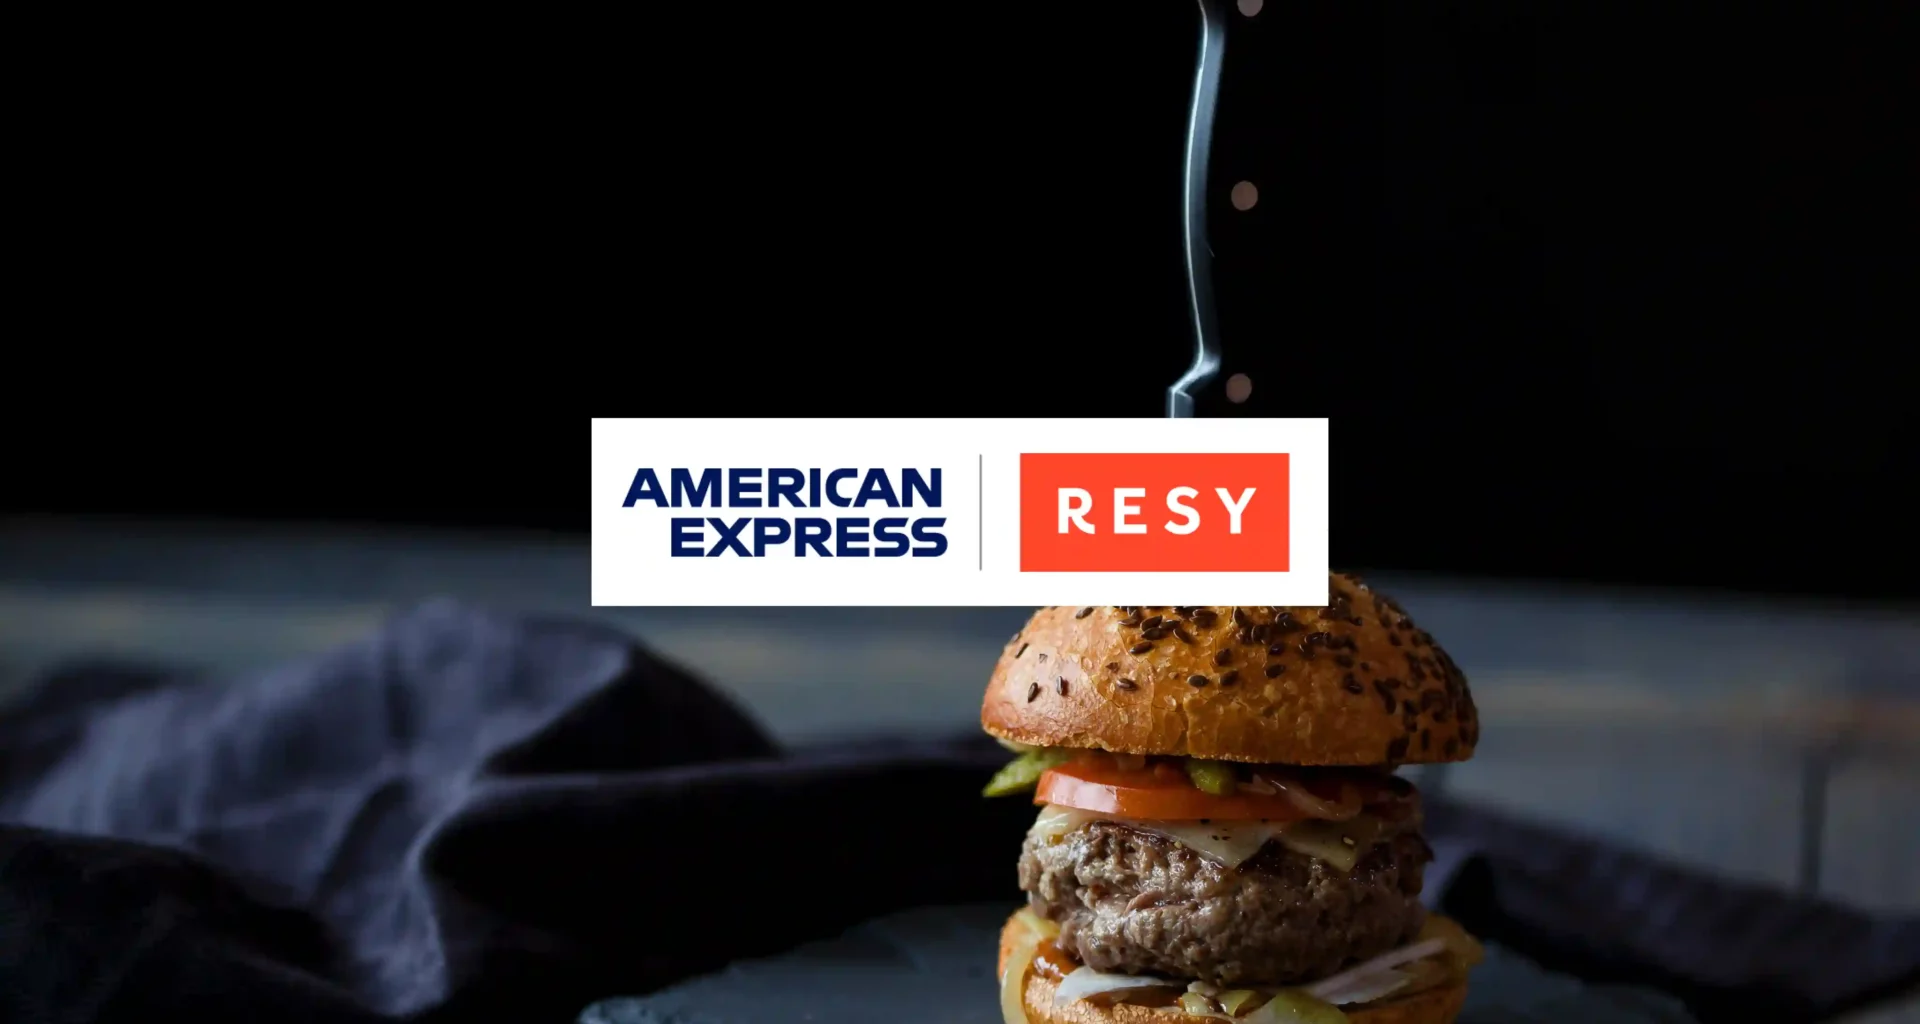 American Express and Resy logos on top of burger